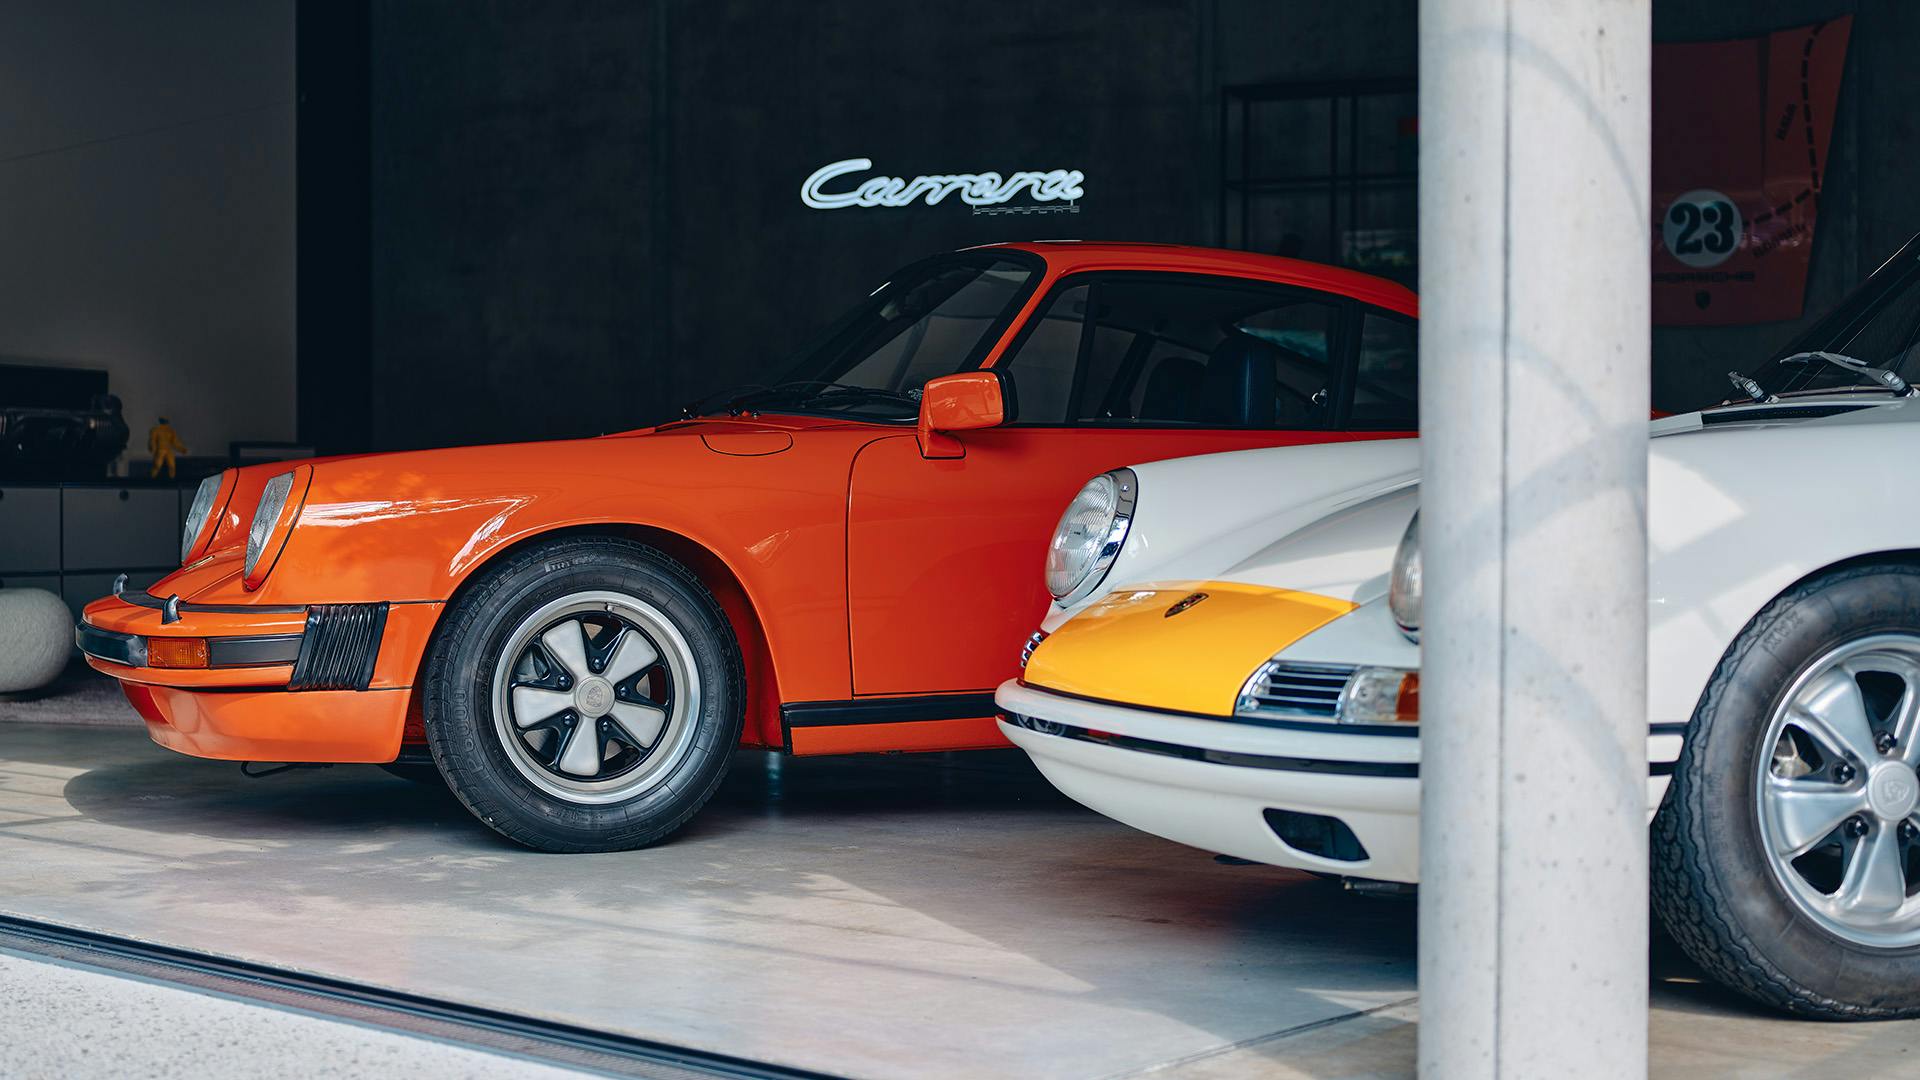 Shown are two oldtimer Porsche in the color orange and white-yellow in a soul garage.